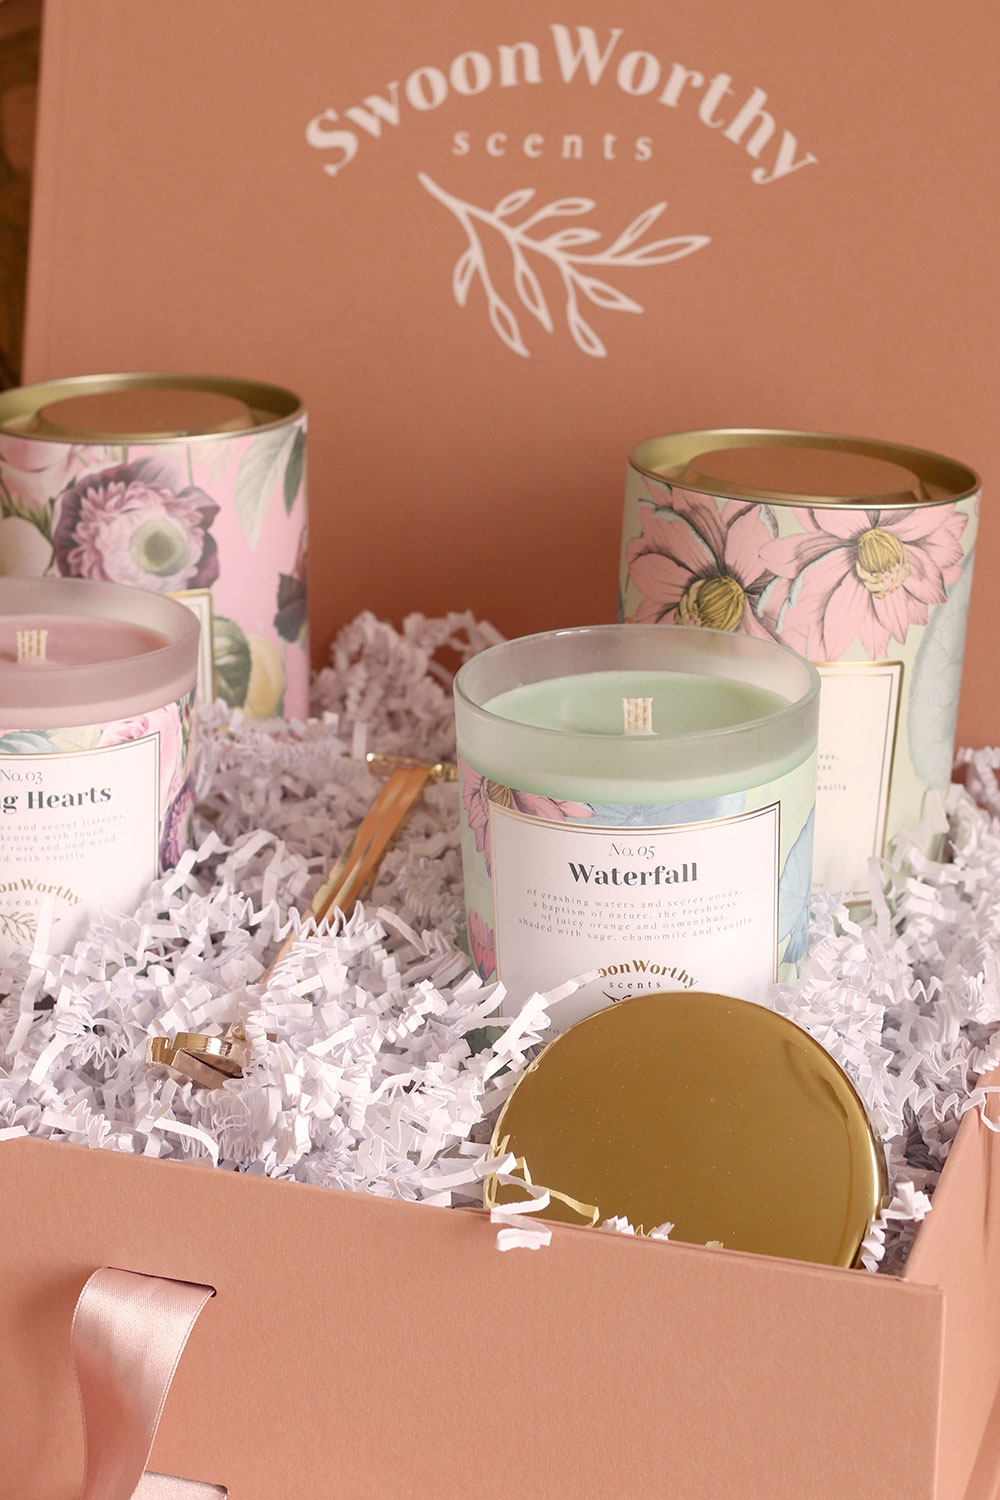 Swoon Worthy Scents gift box bundle detail